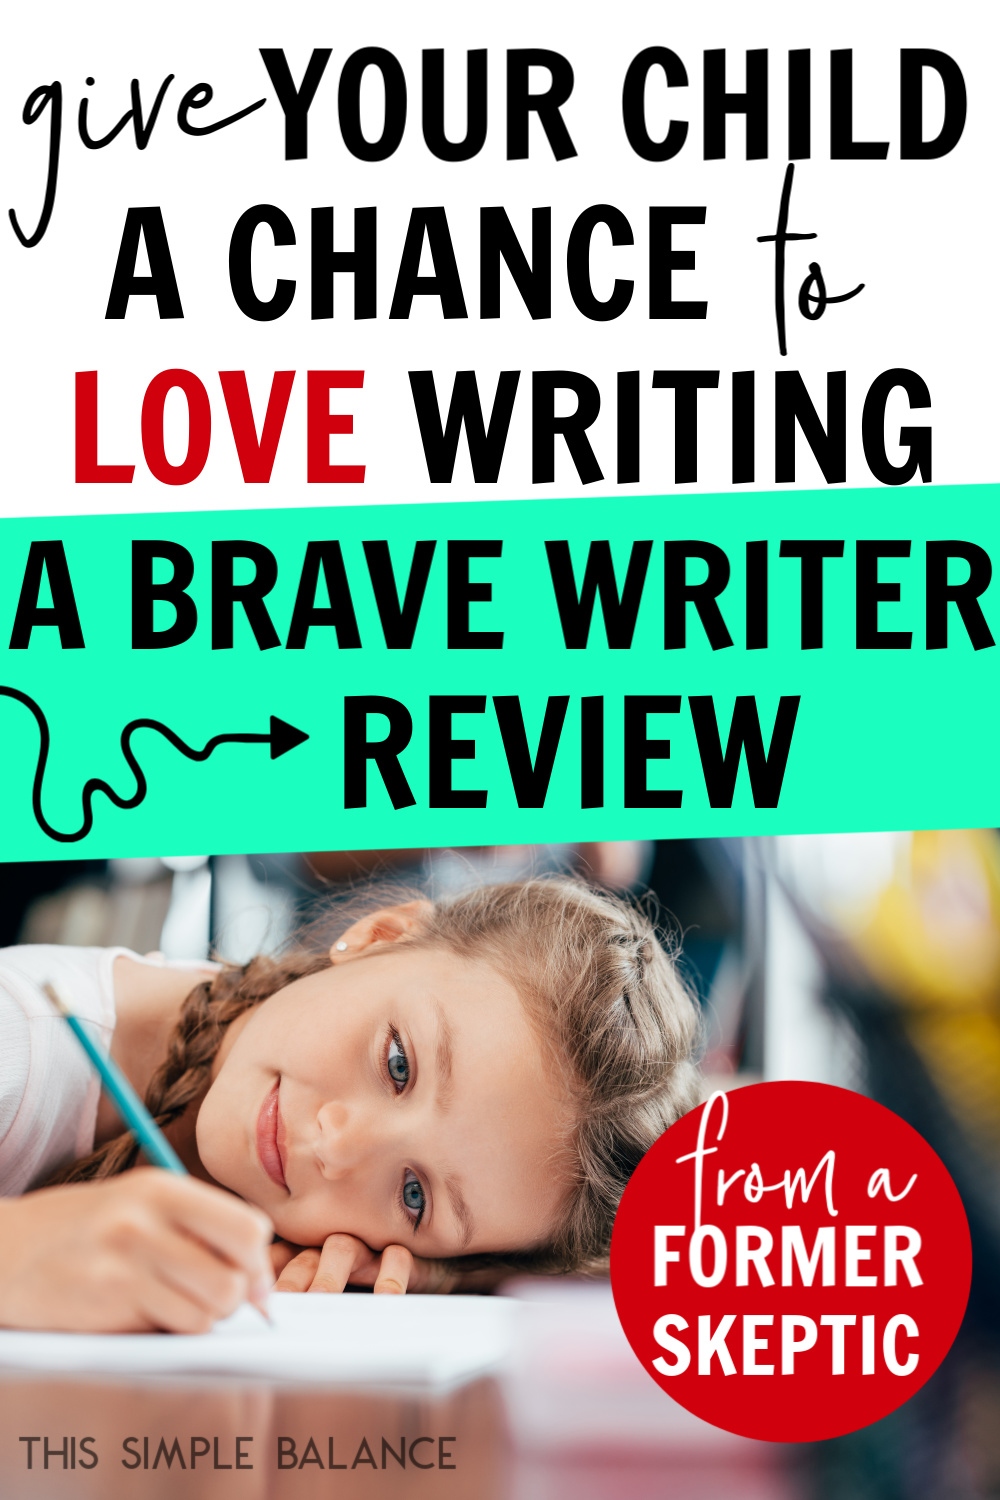 homeschooled girl enjoying writing in her notebook, with text overlay, "give your child a chance to love writing - a brave writer review from a former skeptic"